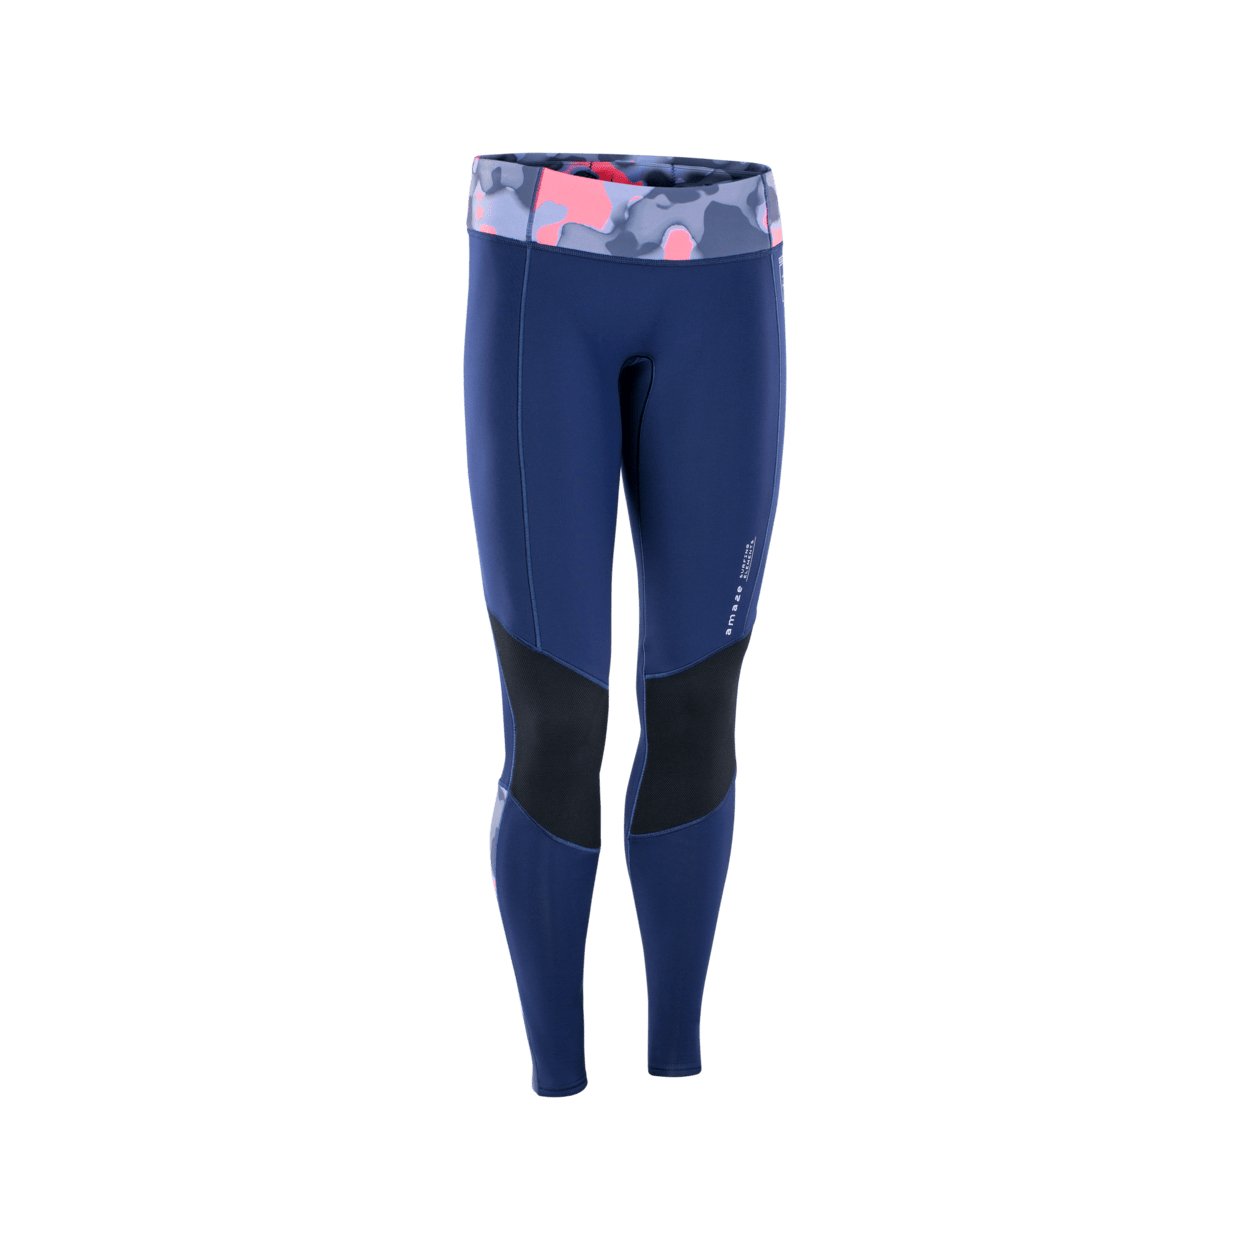 ION Women Surf Leggins Amaze Long Pants 1.5 2023 - Worthing Watersports - 9010583058511 - Wetsuits - ION Water